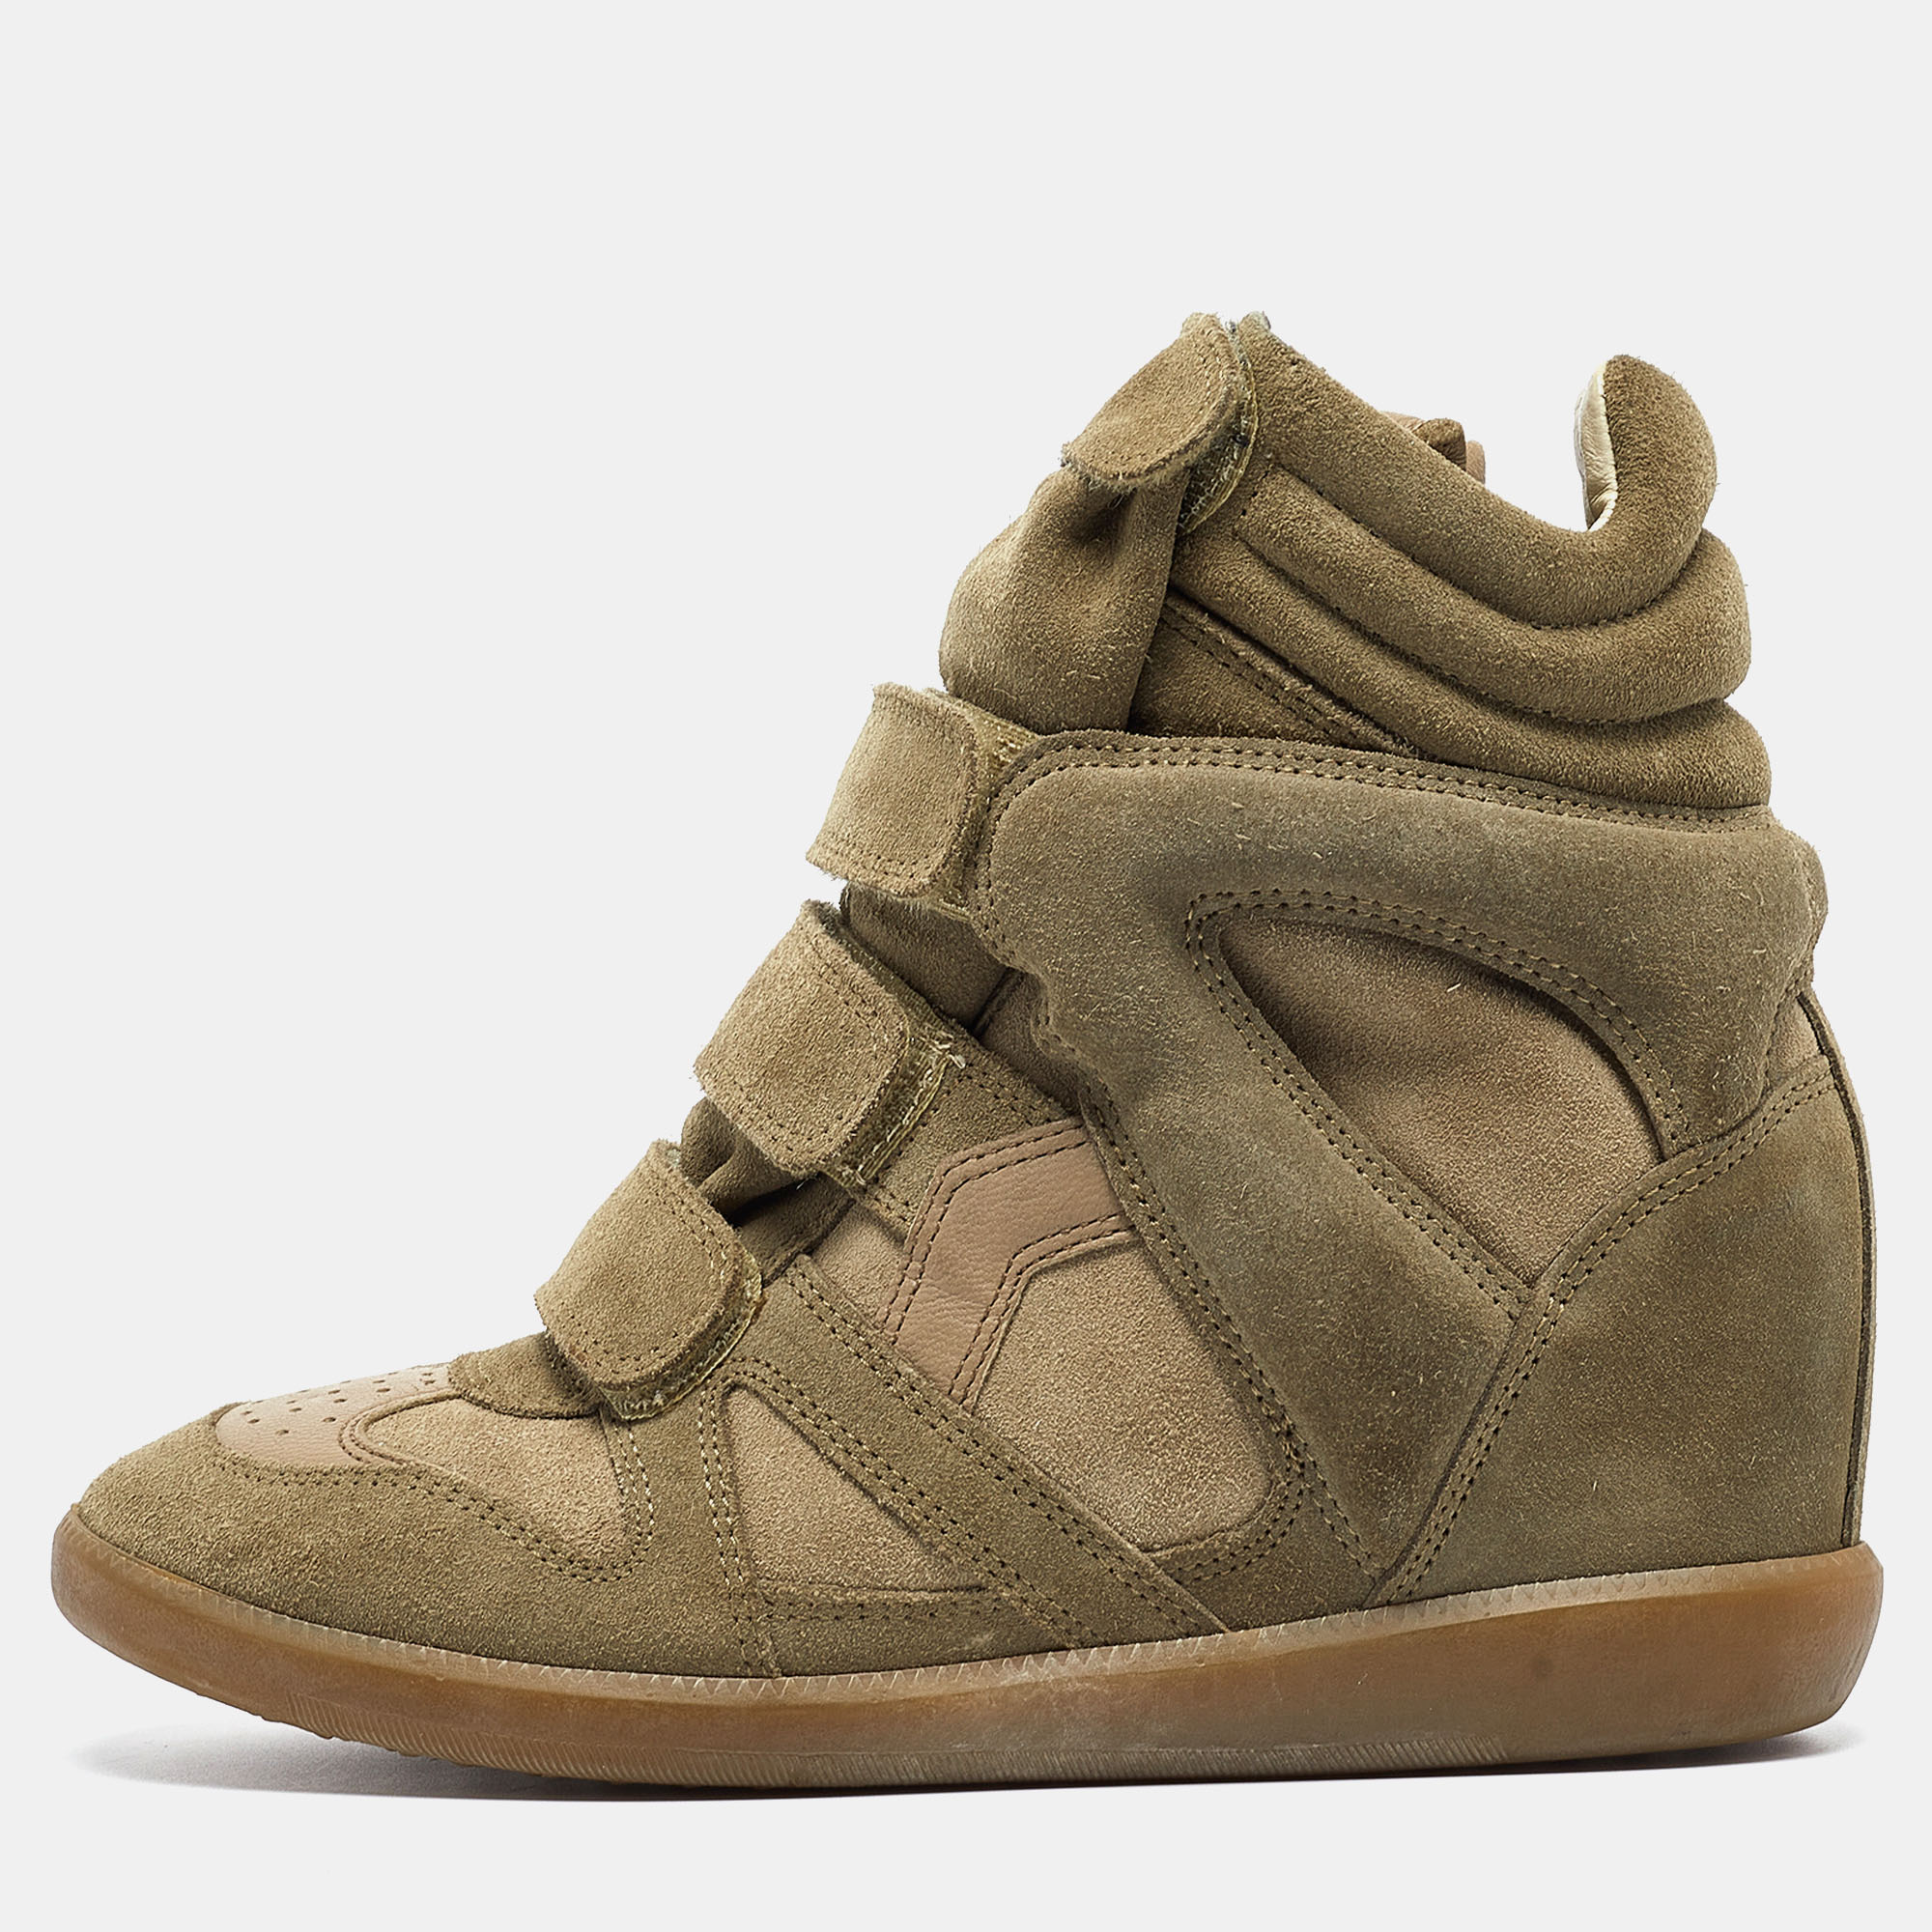 Designed to elevate your style quotient and give you comfort at the same time these Isabel Marant wedge sneakers are crafted using the best materials. Pair them with your casuals for a cool look.